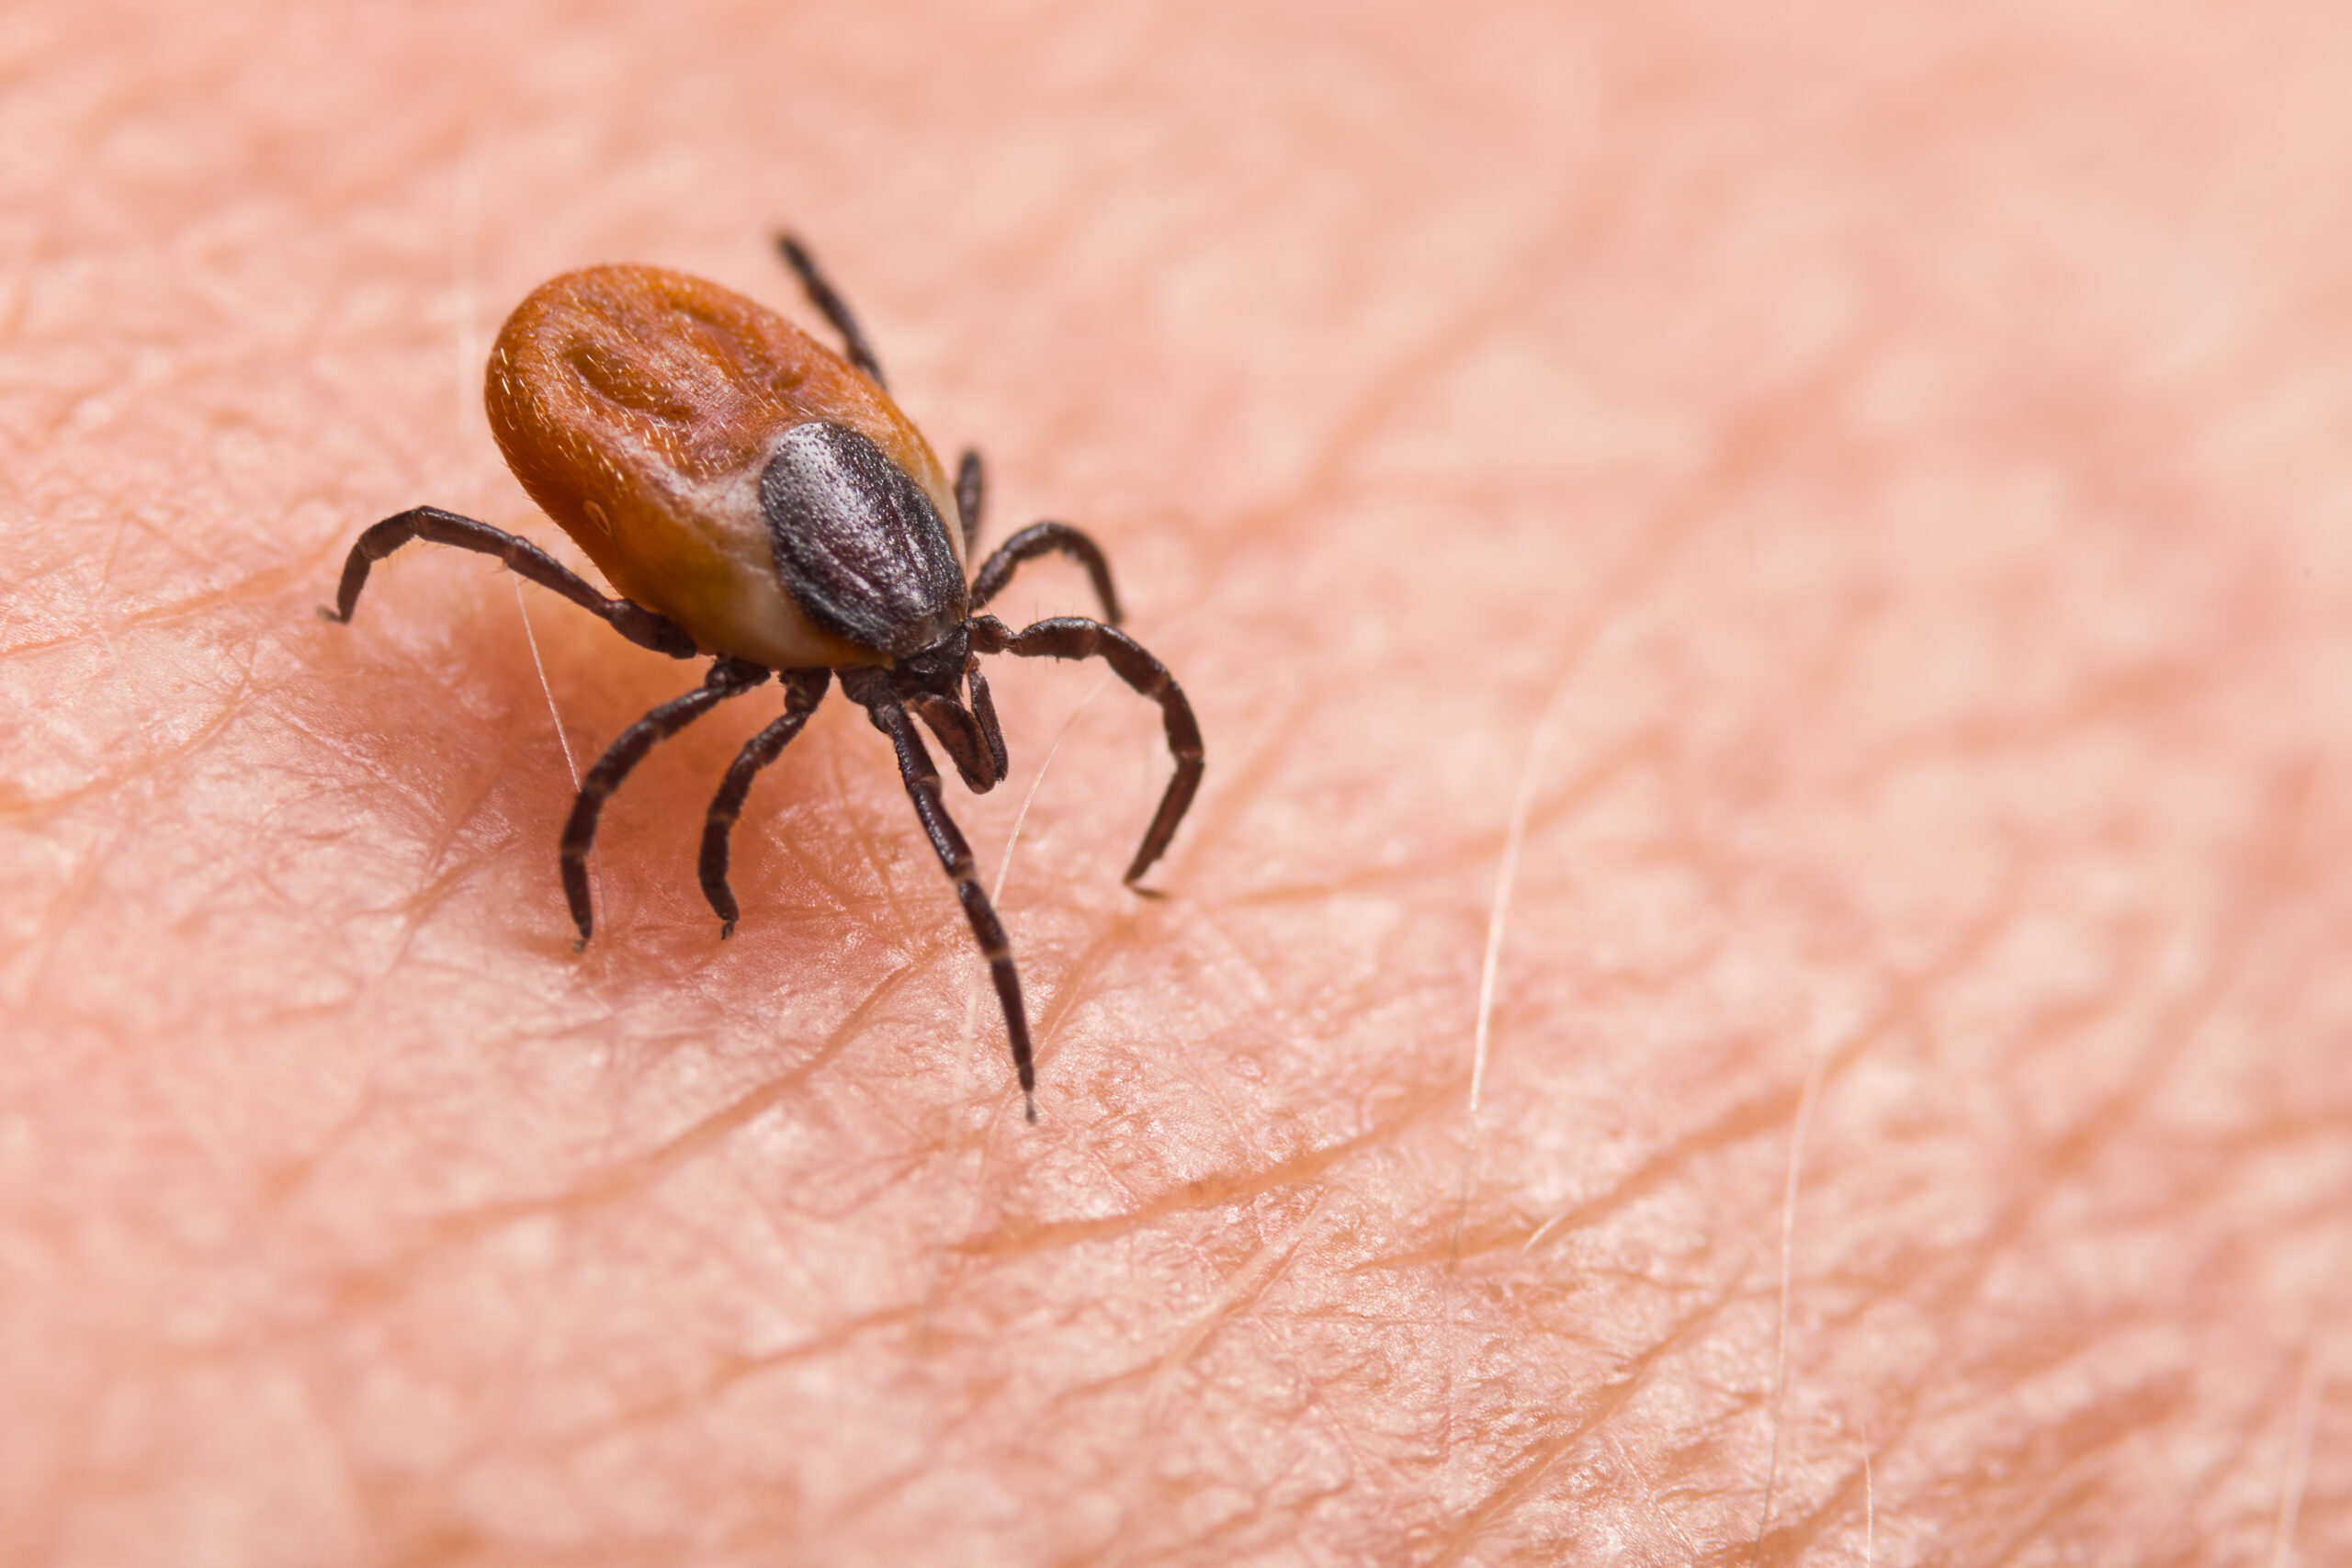 a close up image of a tick walking on skin